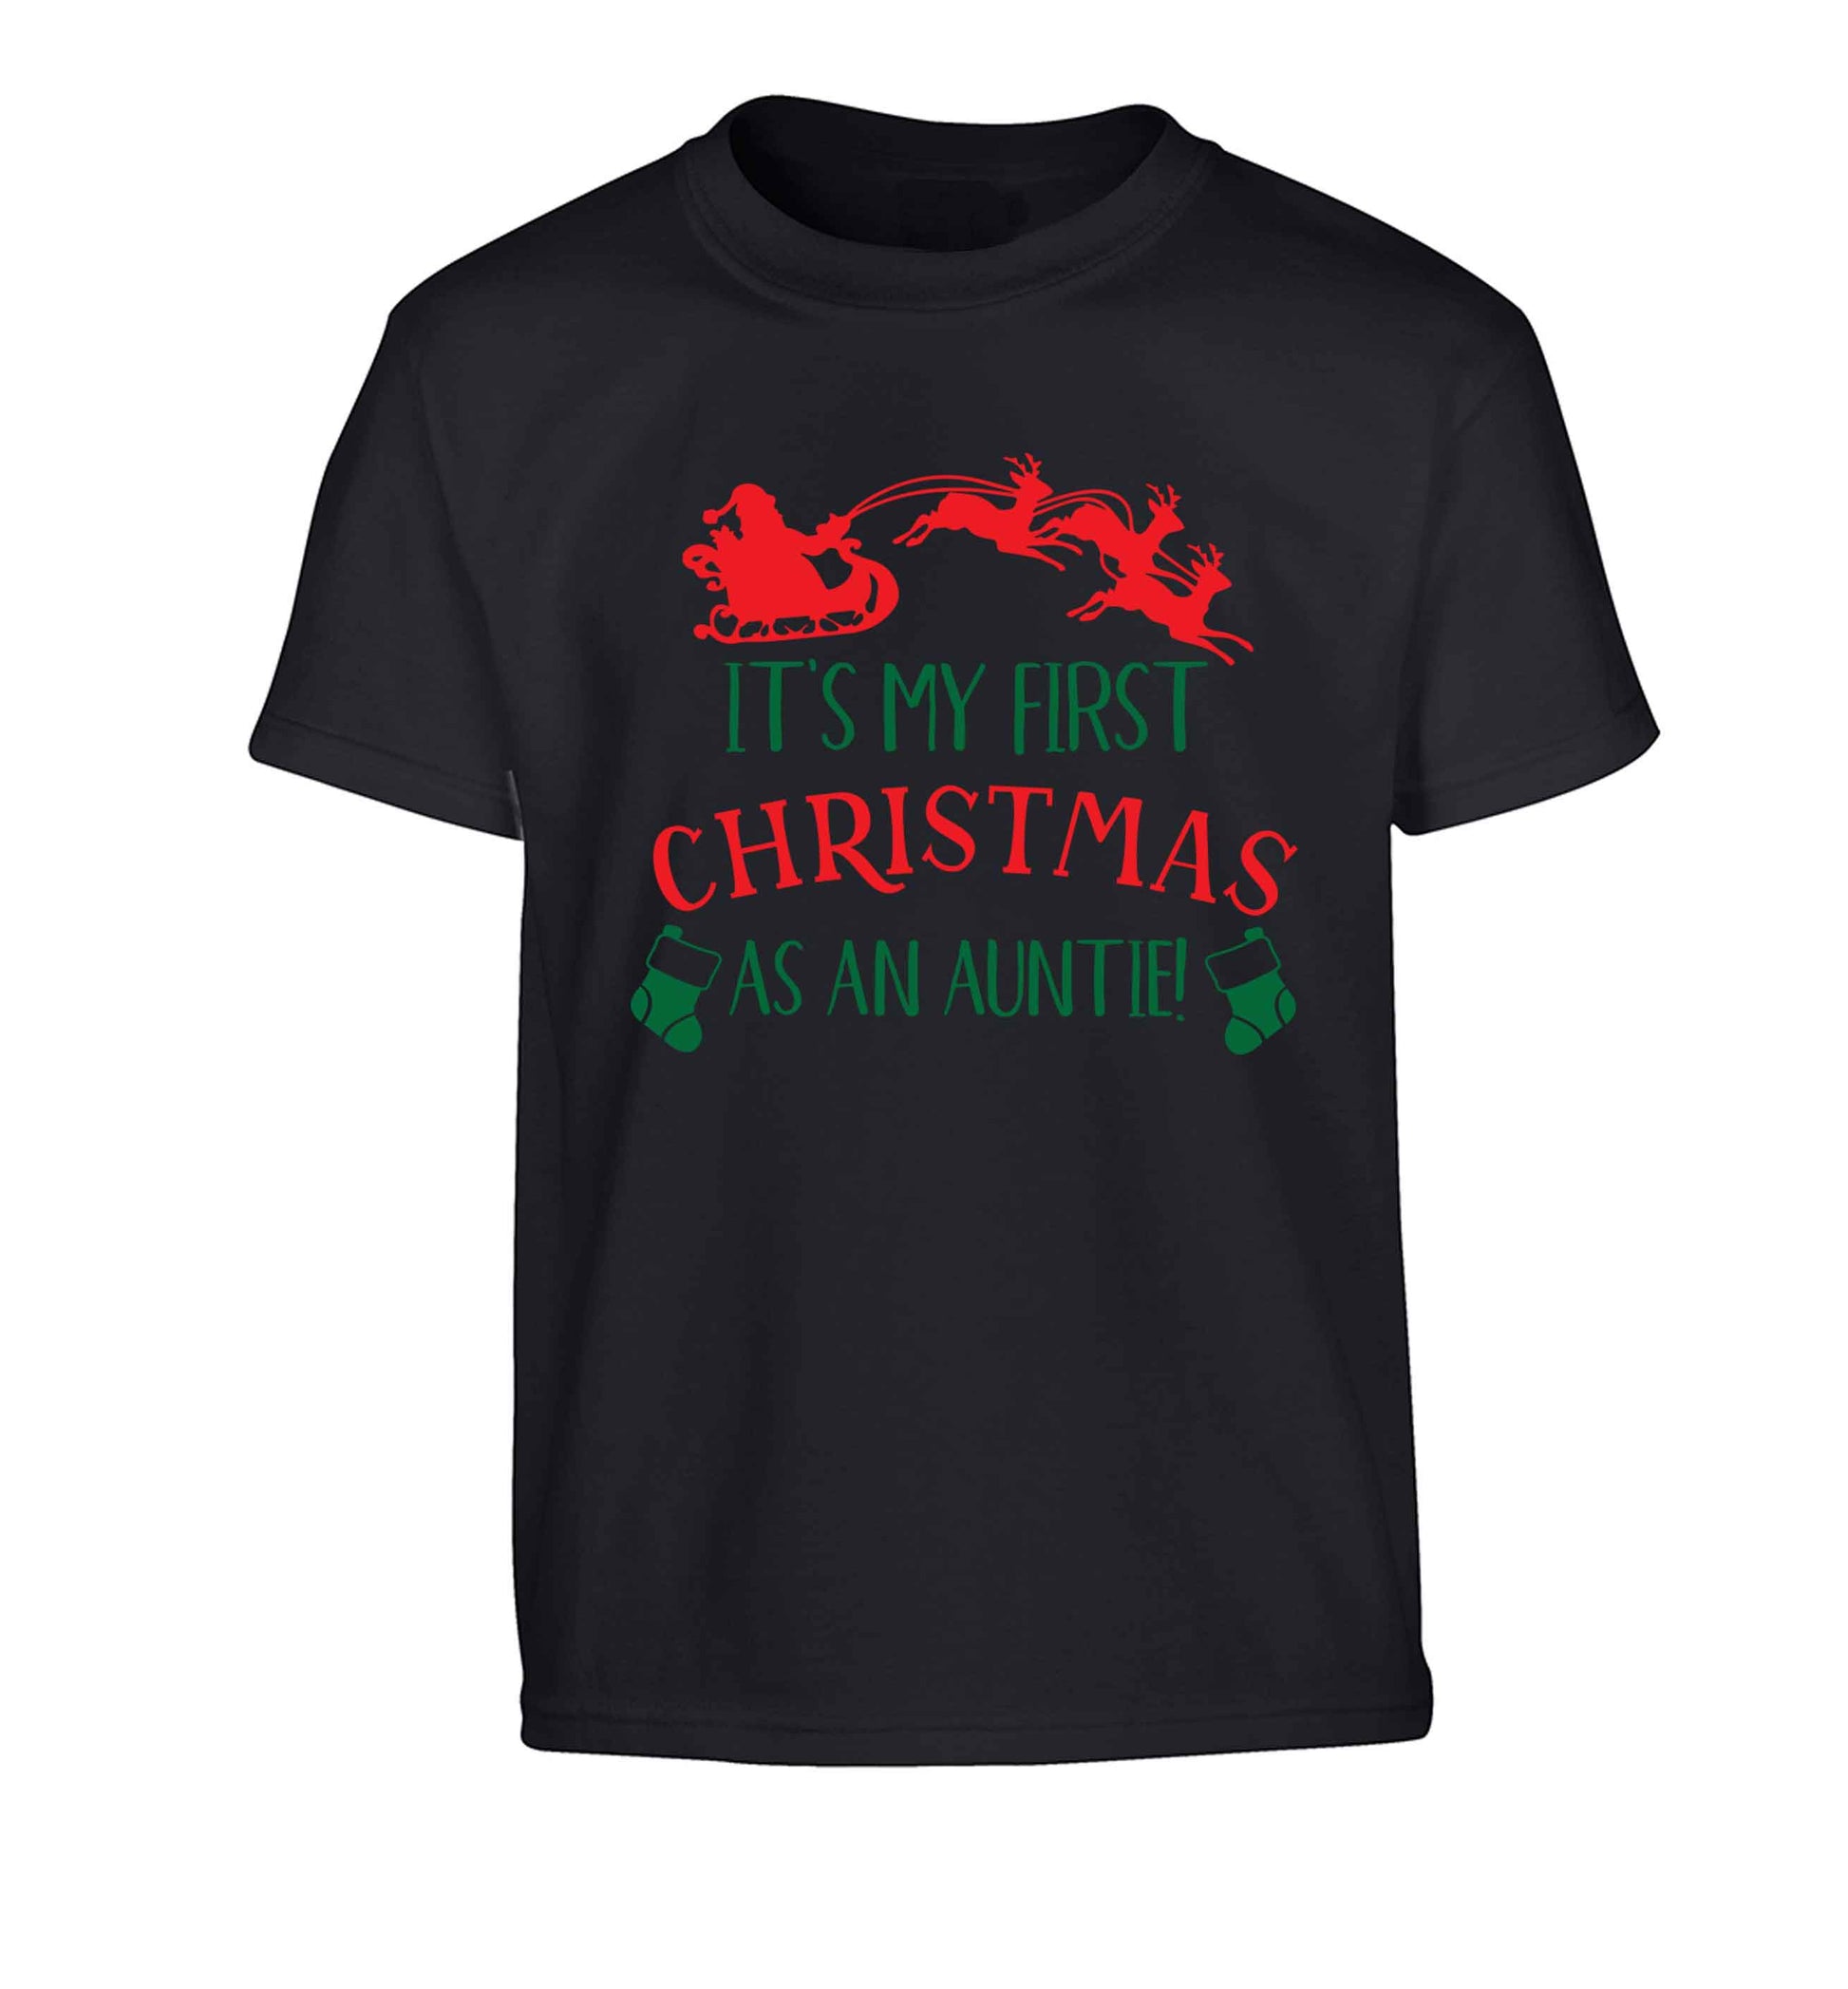 It's my first Christmas as an auntie! Children's black Tshirt 12-13 Years